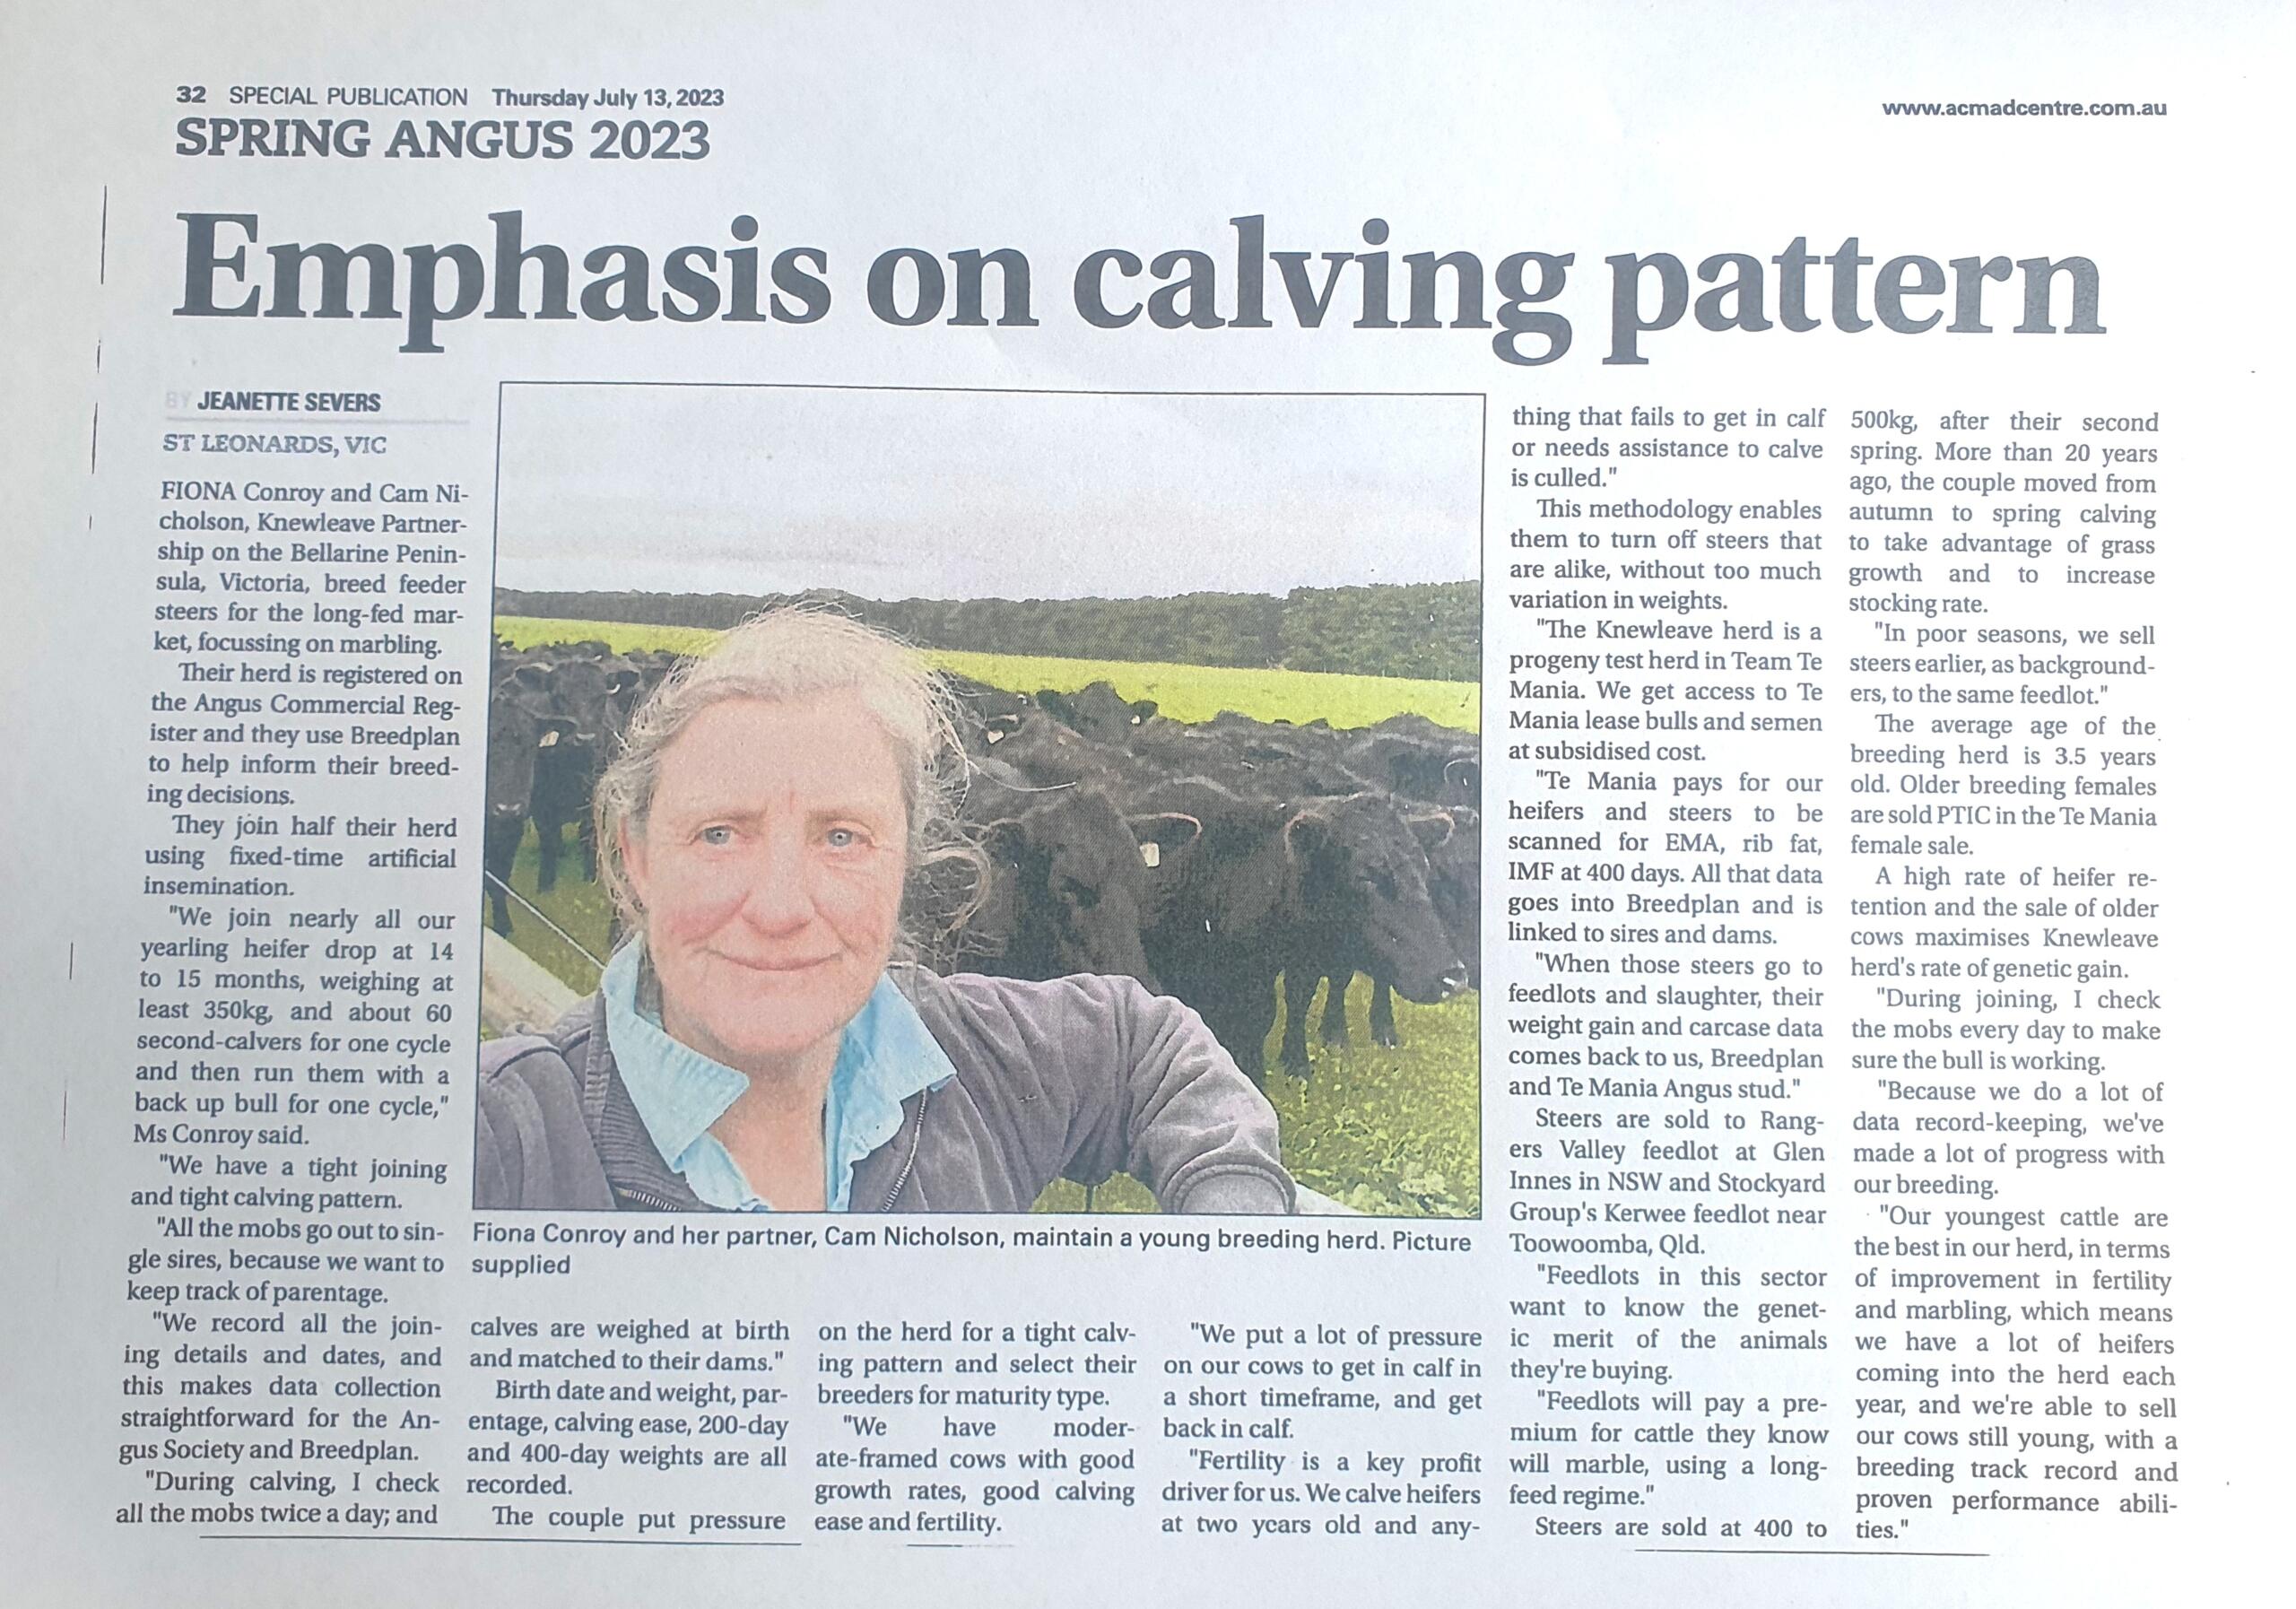 Spring Angus Feature F.conroy Article